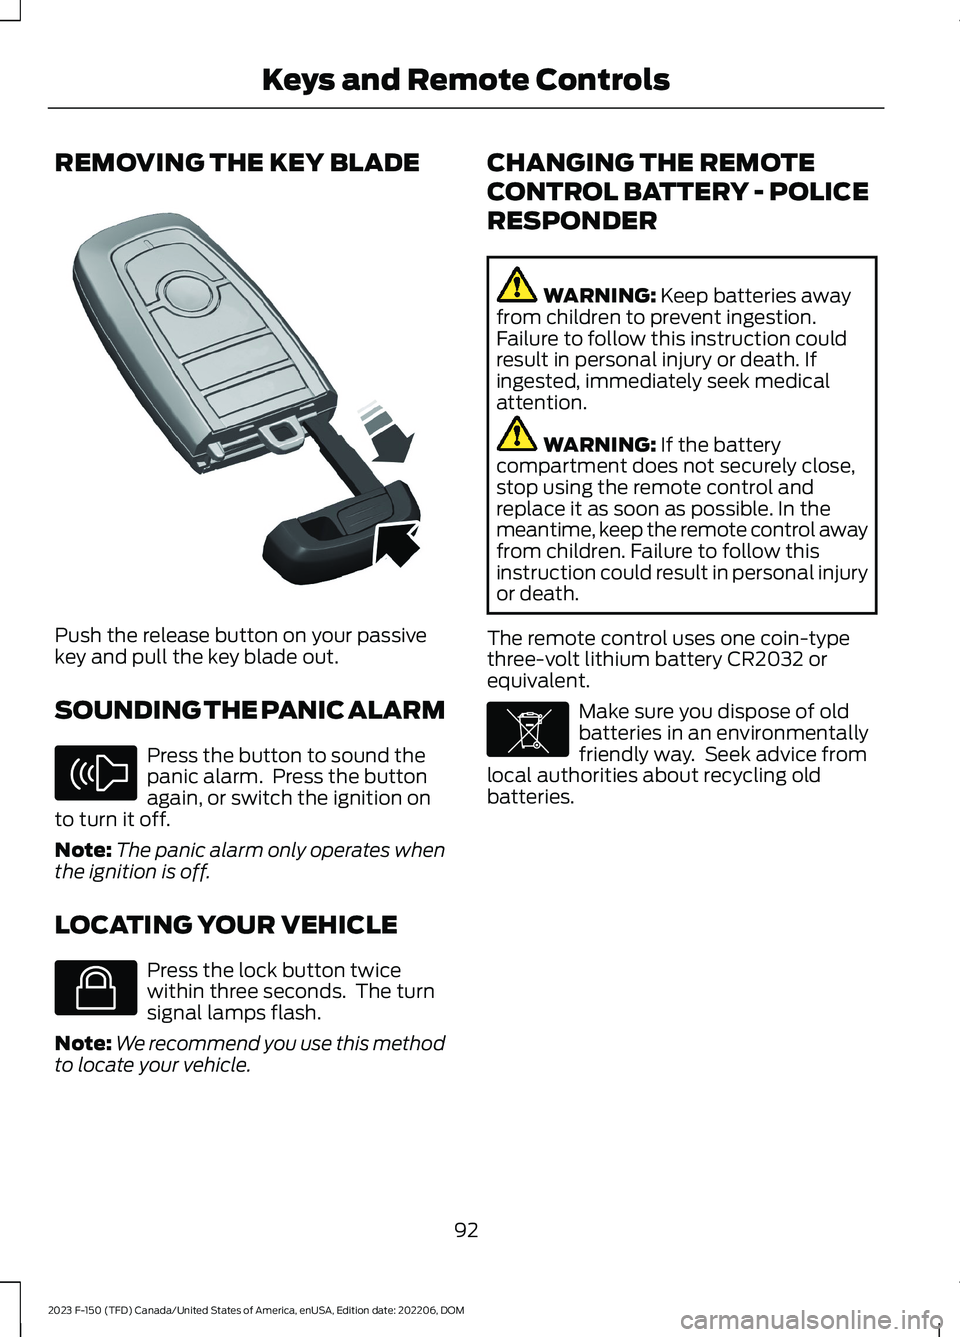 FORD F150 2023  Owners Manual REMOVING THE KEY BLADE
Push the release button on your passivekey and pull the key blade out.
SOUNDING THE PANIC ALARM
Press the button to sound thepanic alarm.  Press the buttonagain, or switch the i